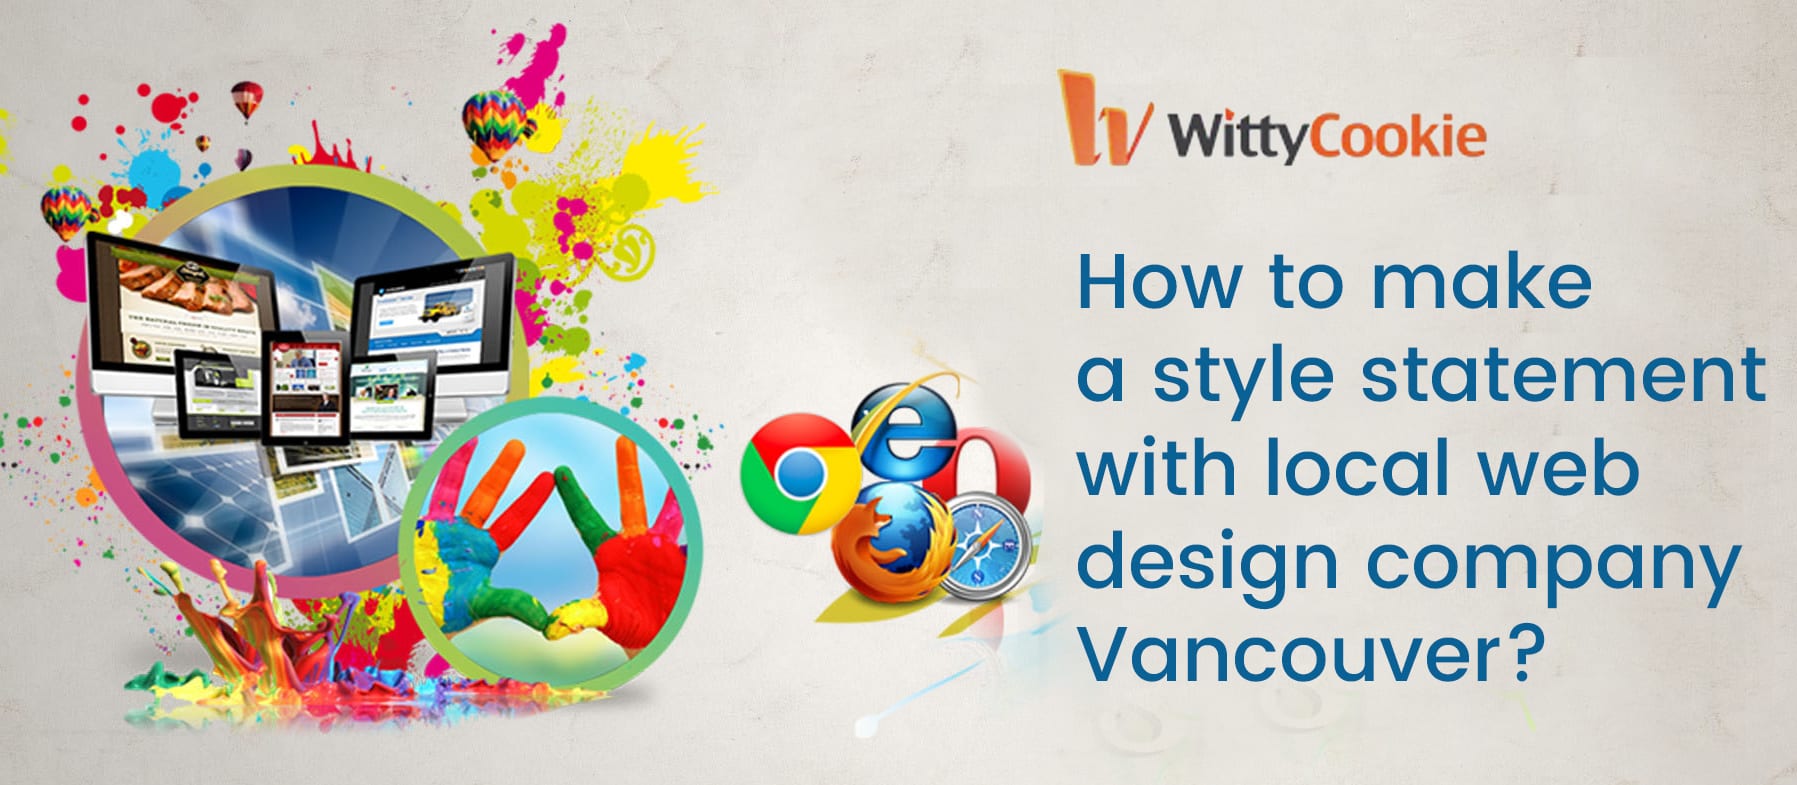 how-to-make-a-style-statement-with-local-web-design-company-vancouver